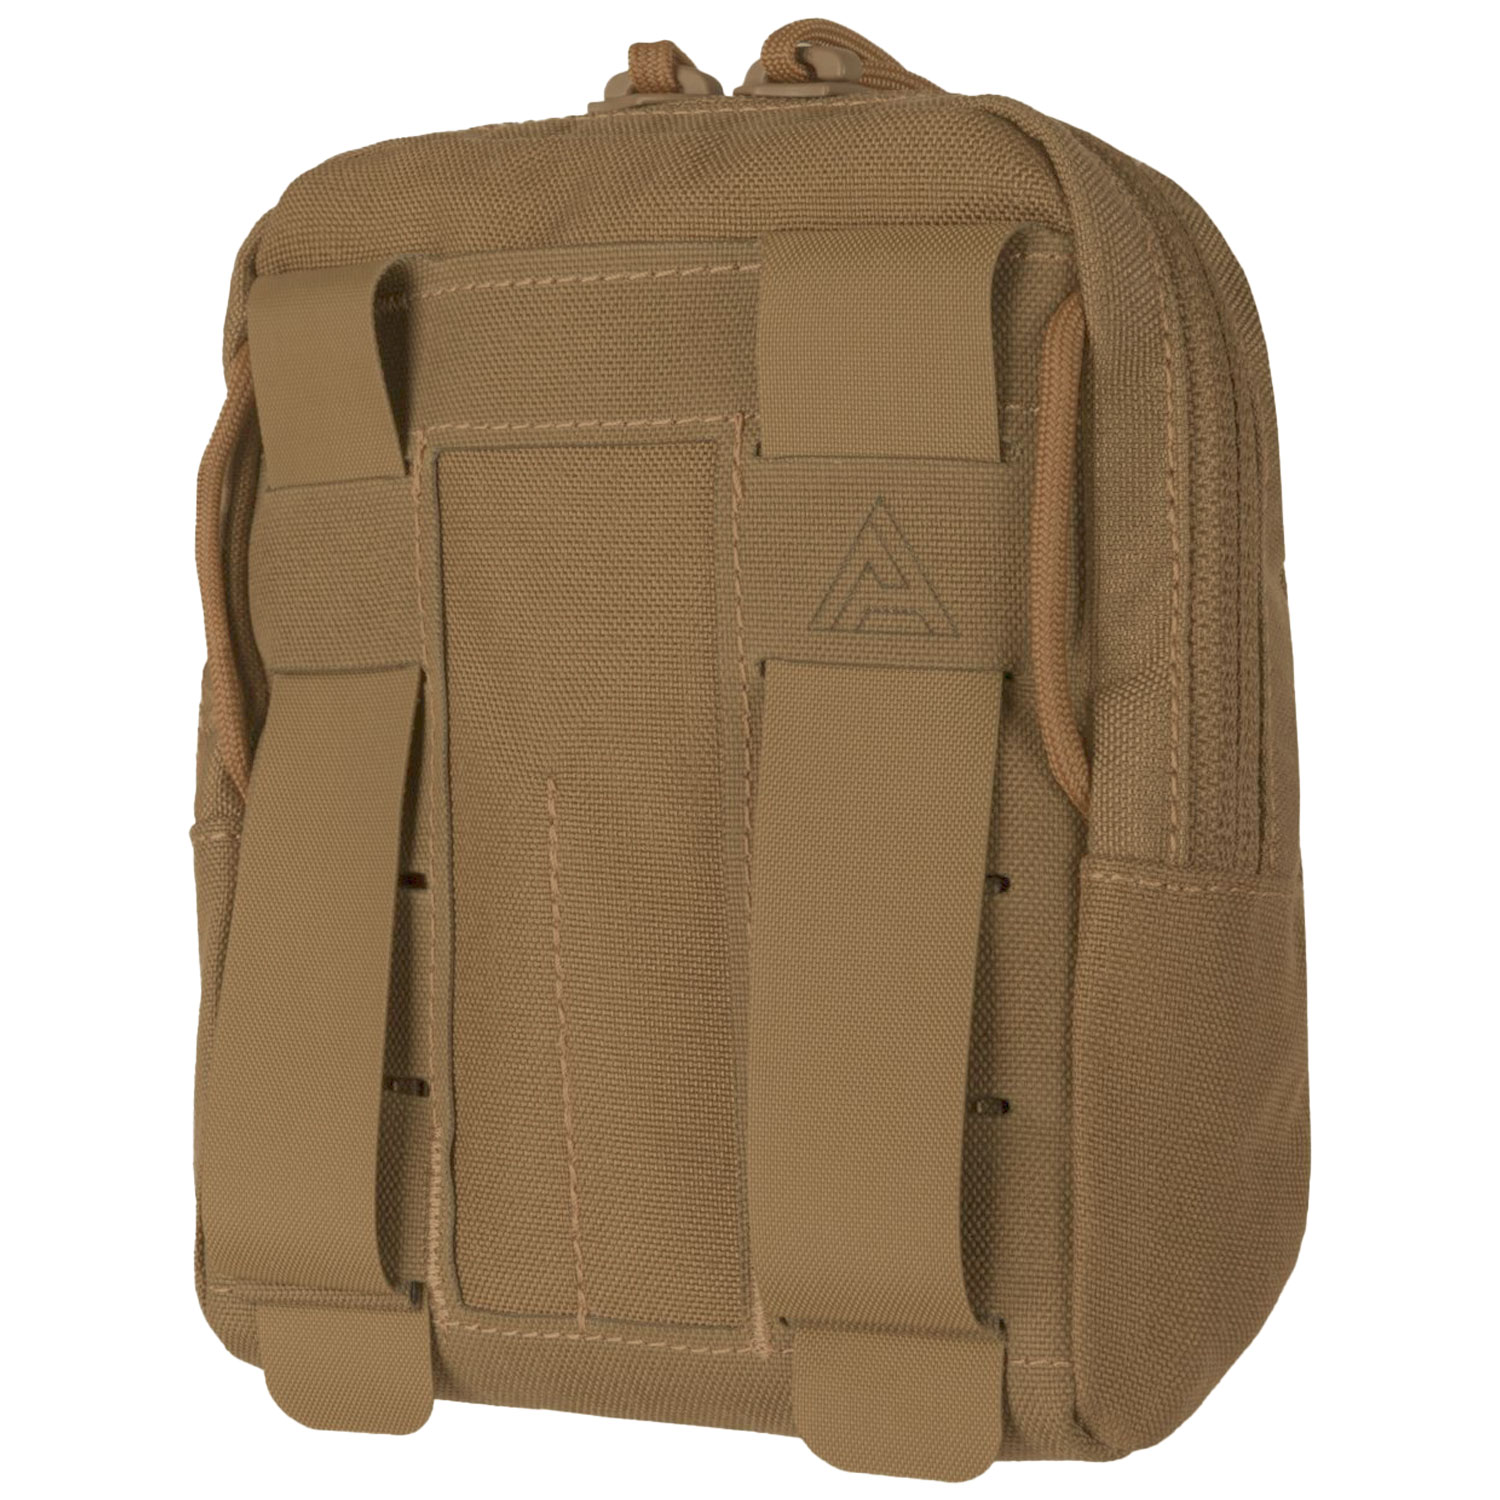 Підсумок Direct Action Utility Pouch Small - Coyote Brown